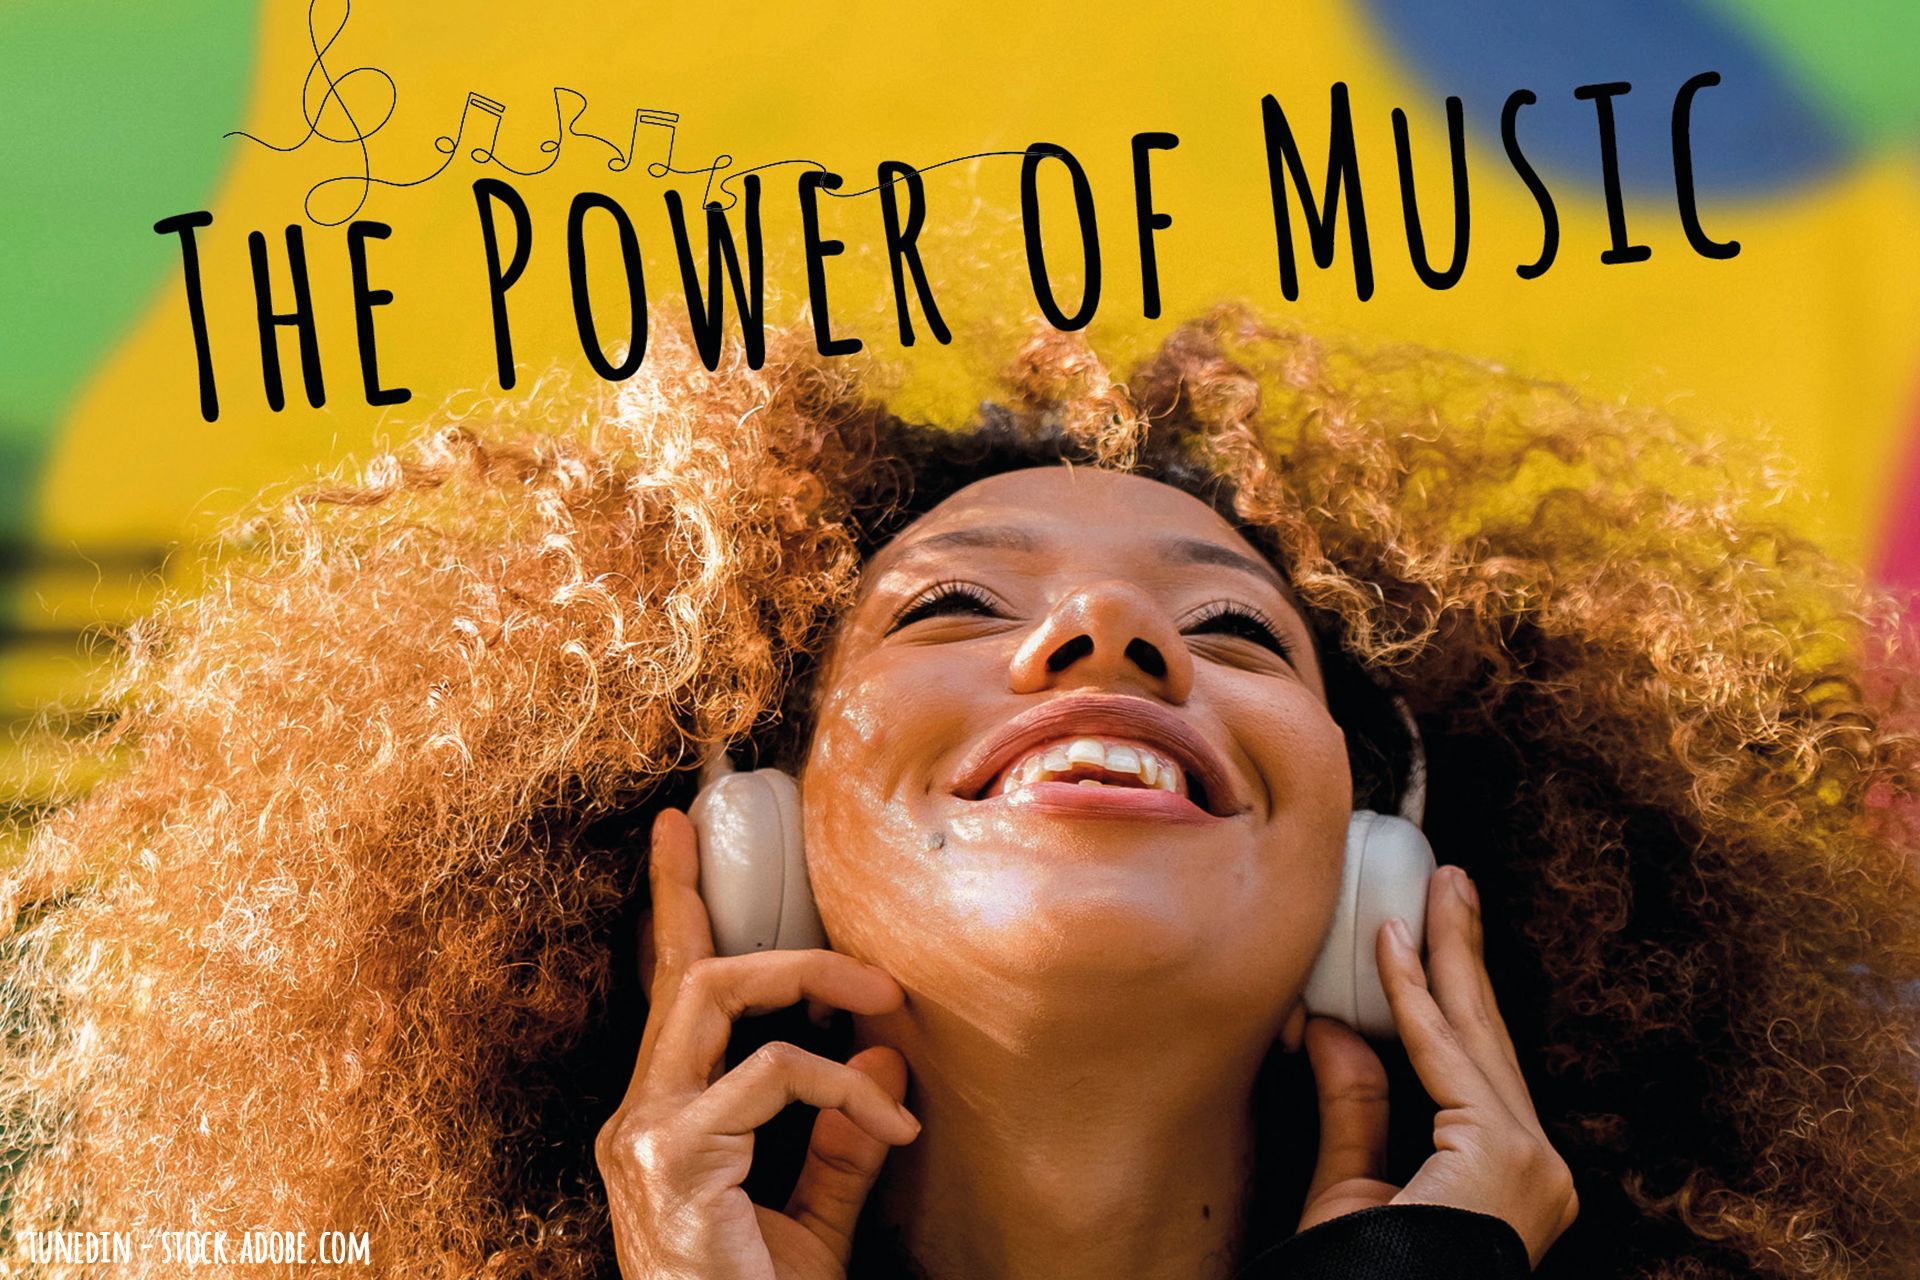 The Power of music